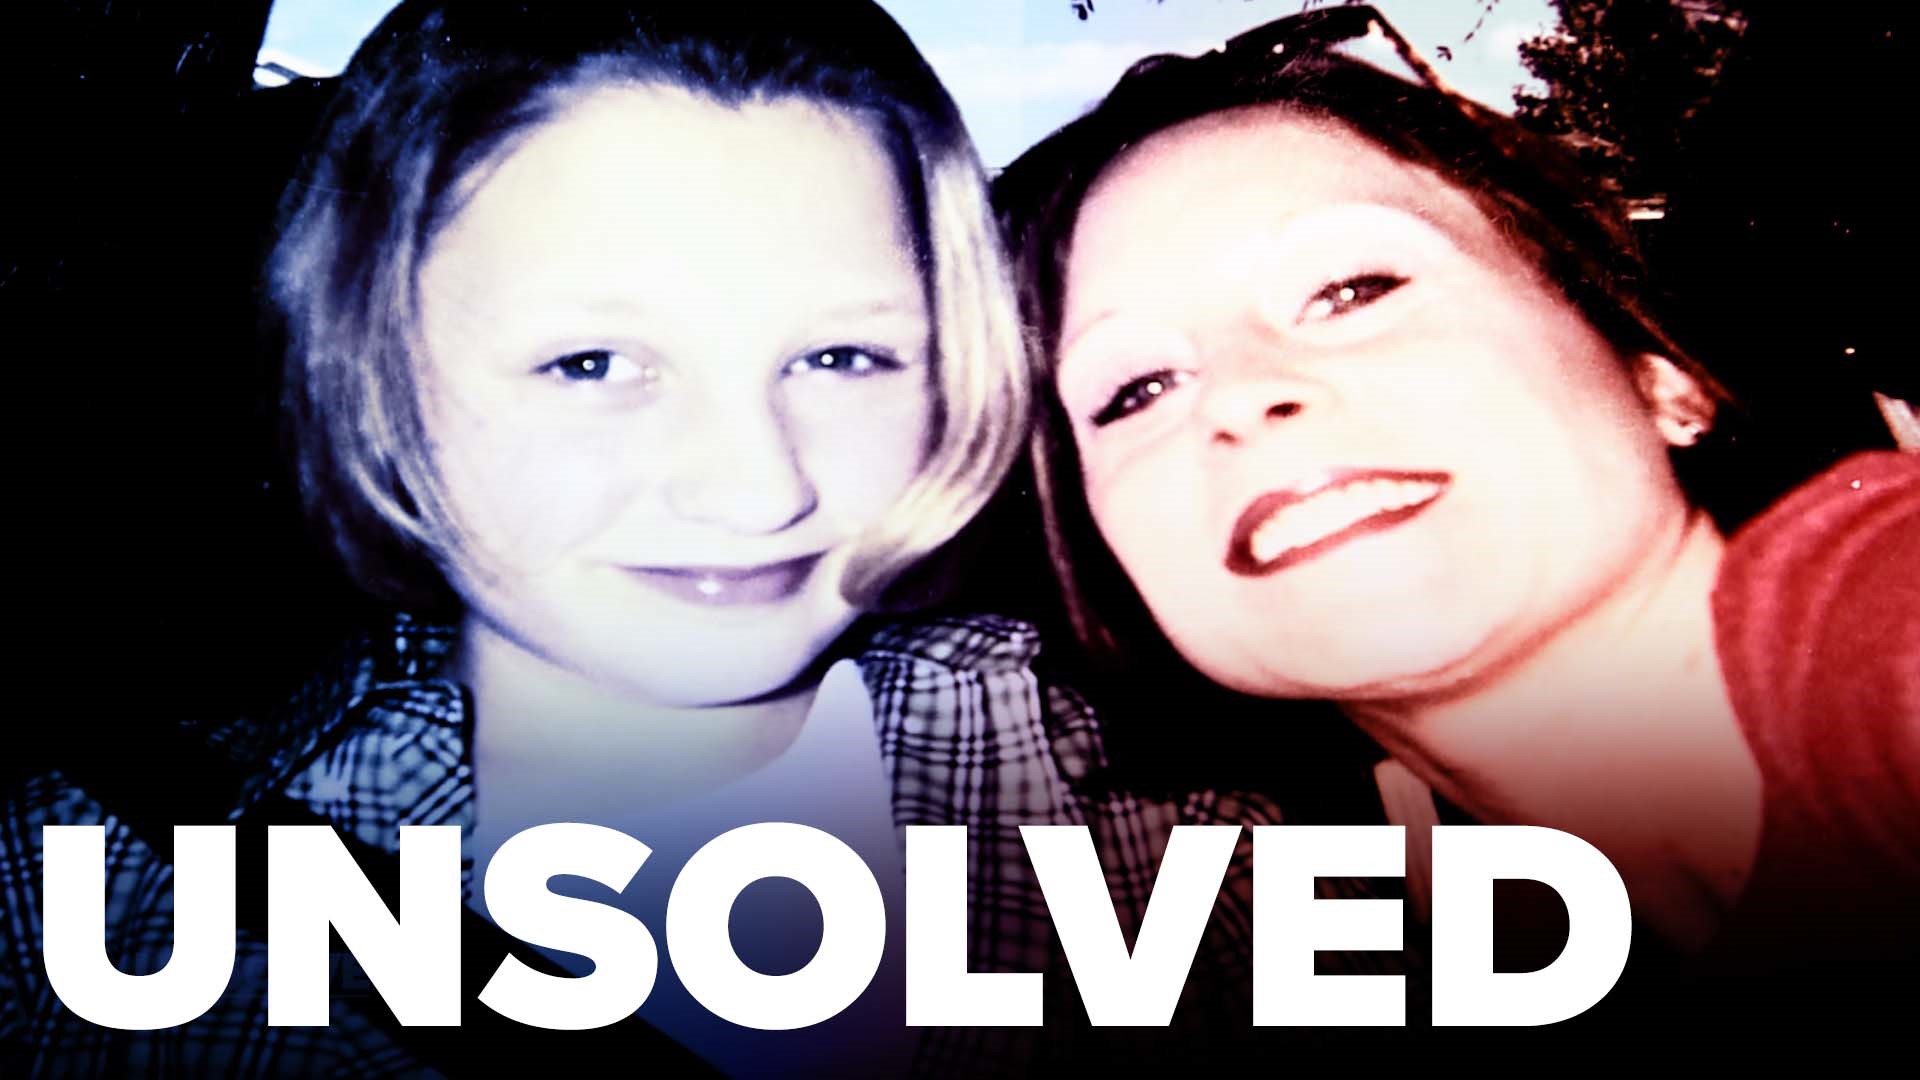 In this episode of Unsolved, we take a deeper look at a group of murder cases in Central Arkansas that are still shrouded in mystery.